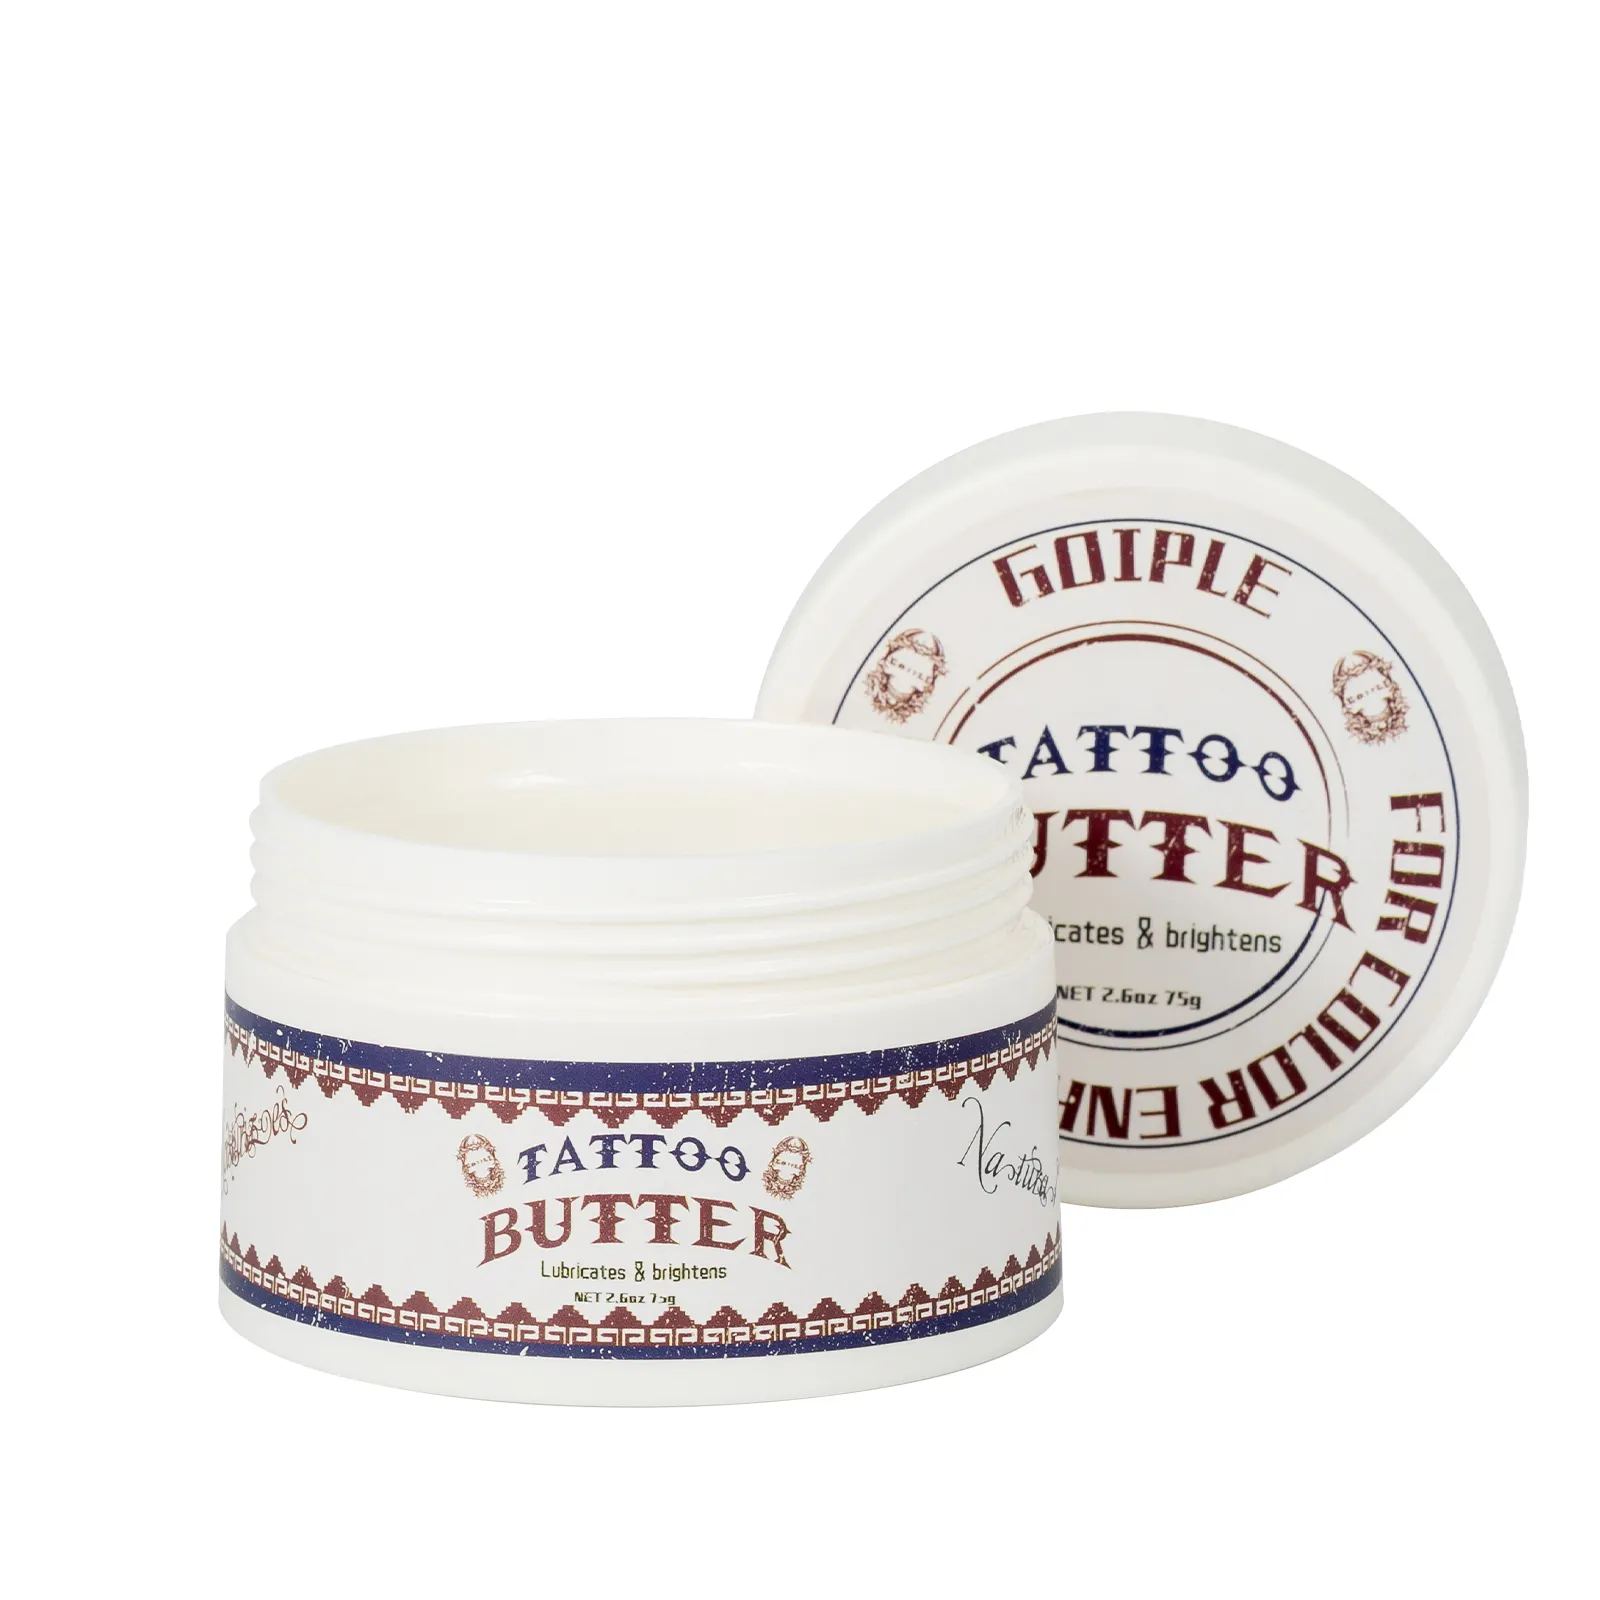 Private Label Tattoo After Care Necessary Product Balm Butter Tattoos Skin Moisturizing Ointment Tattoo Aftercare Cream